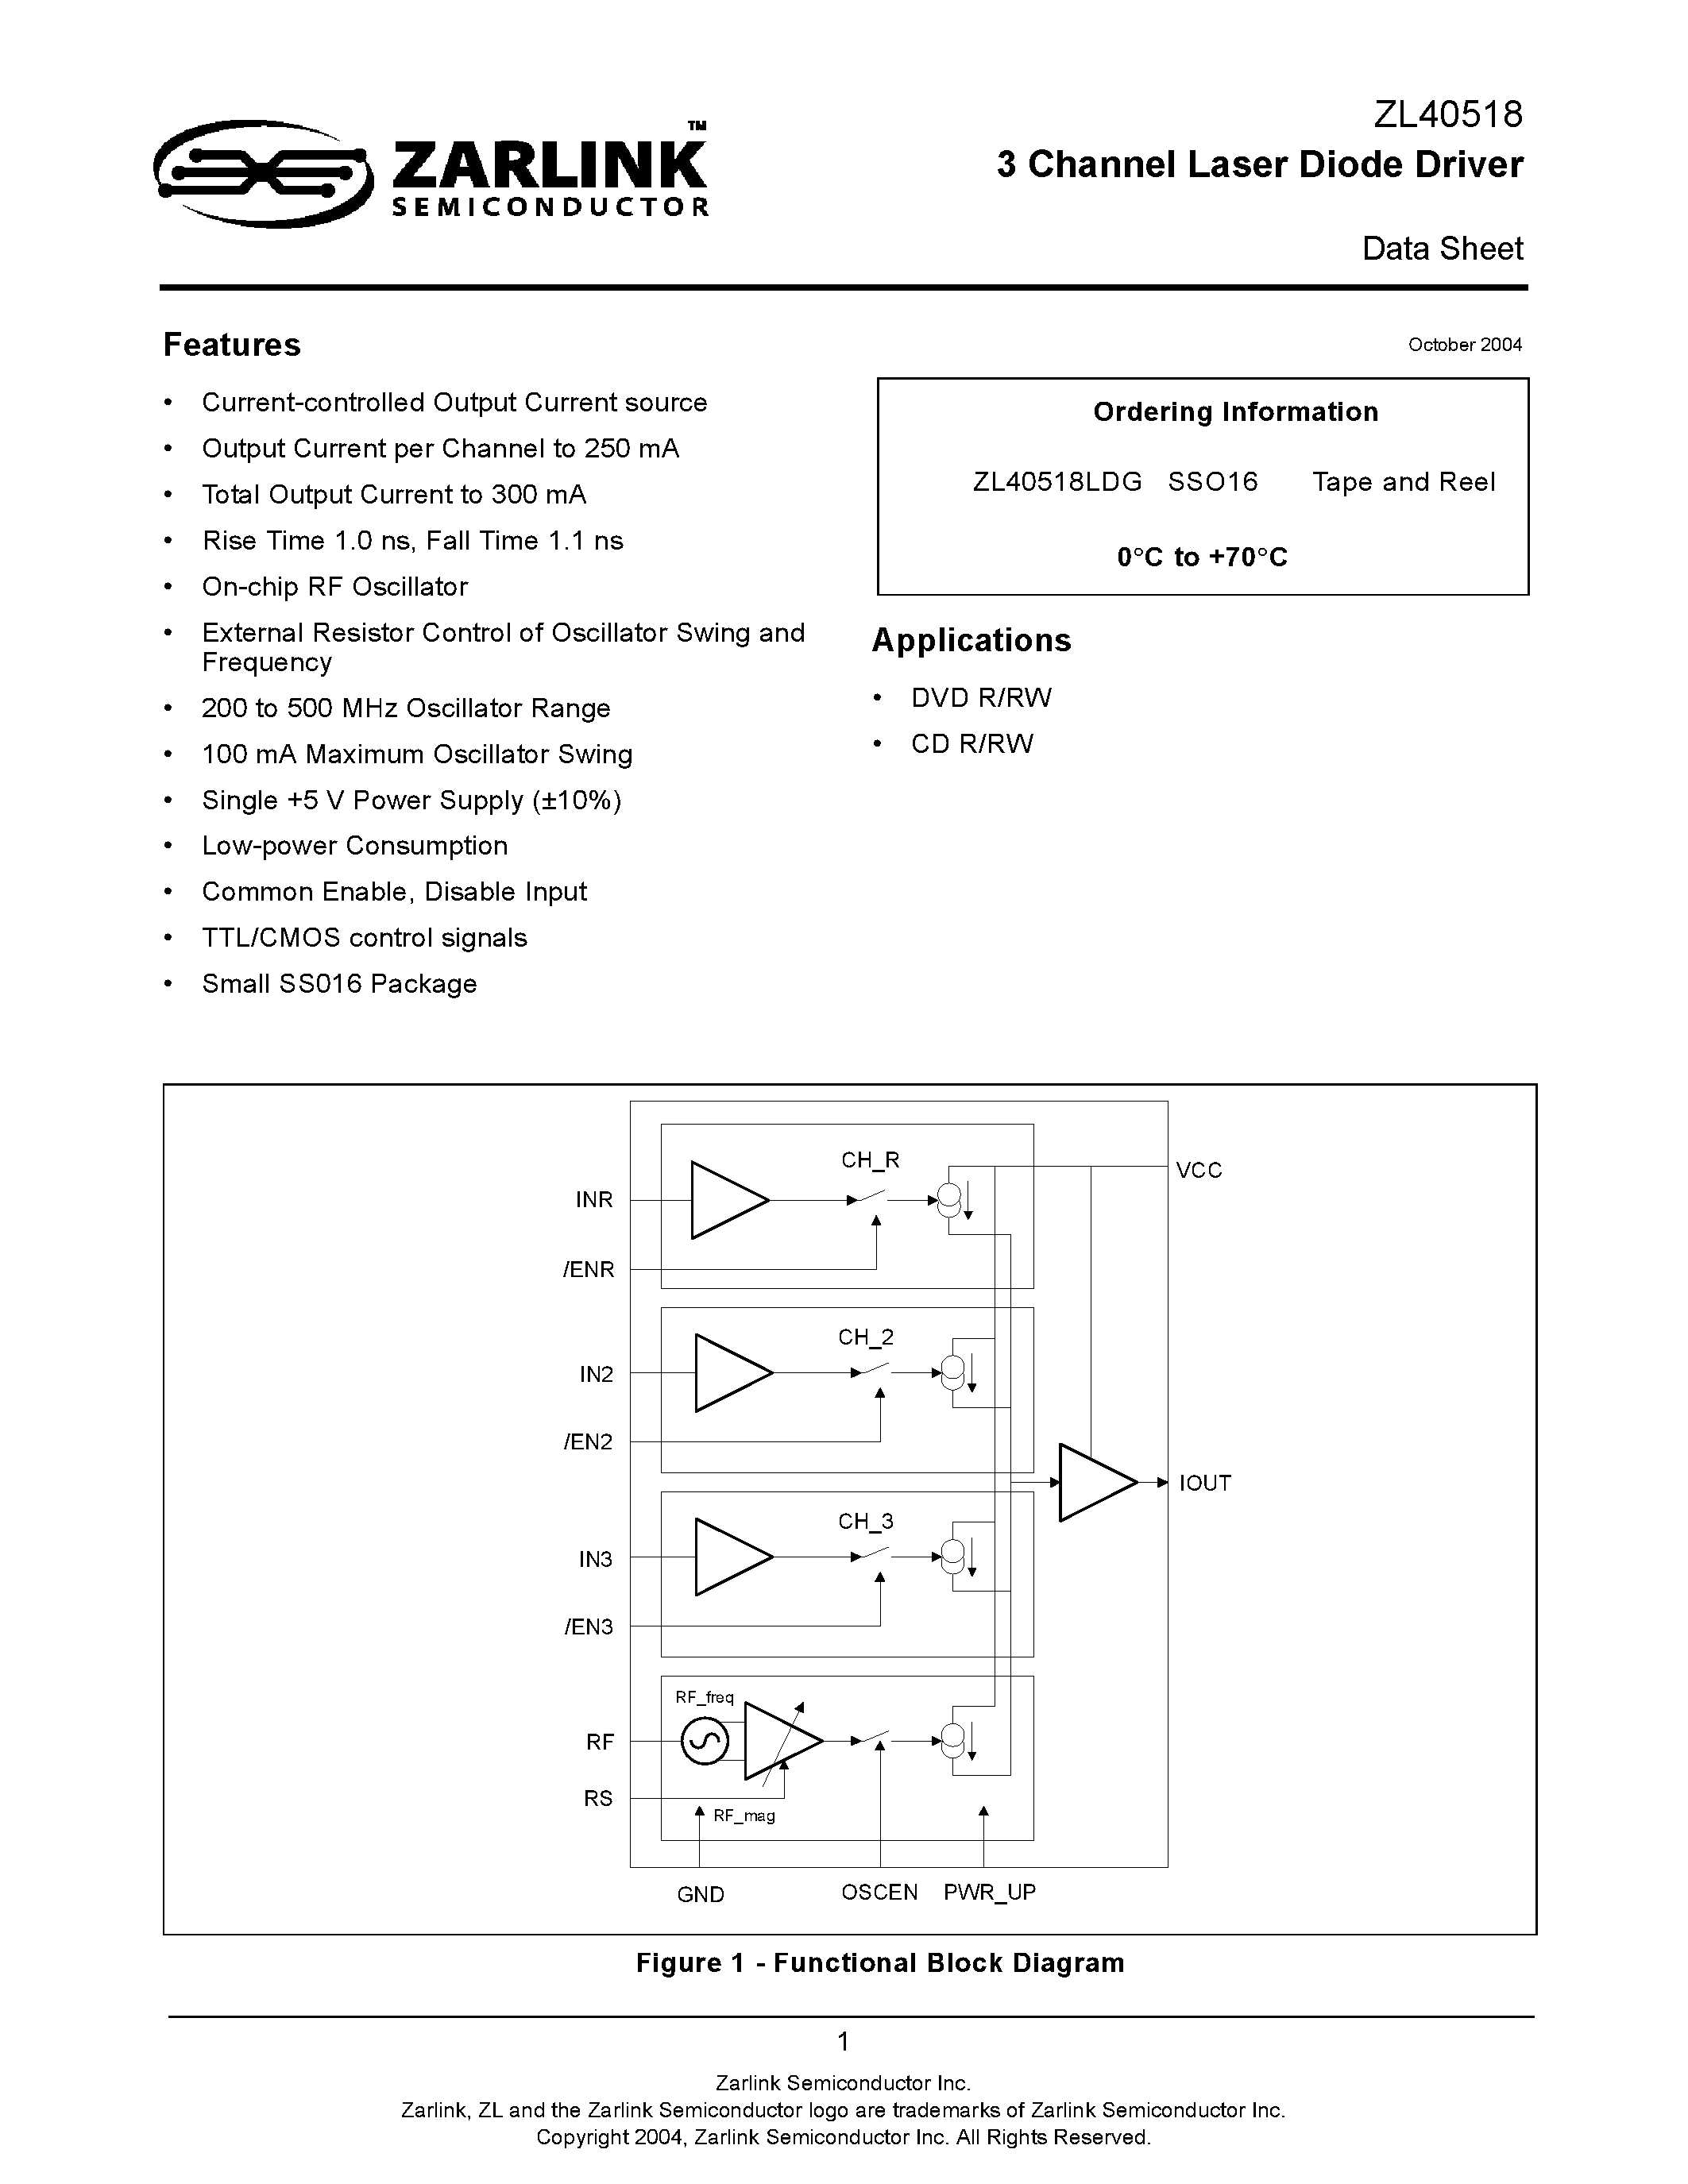 Datasheet ZL40518 - 3 Channel Laser Diode Driver page 1